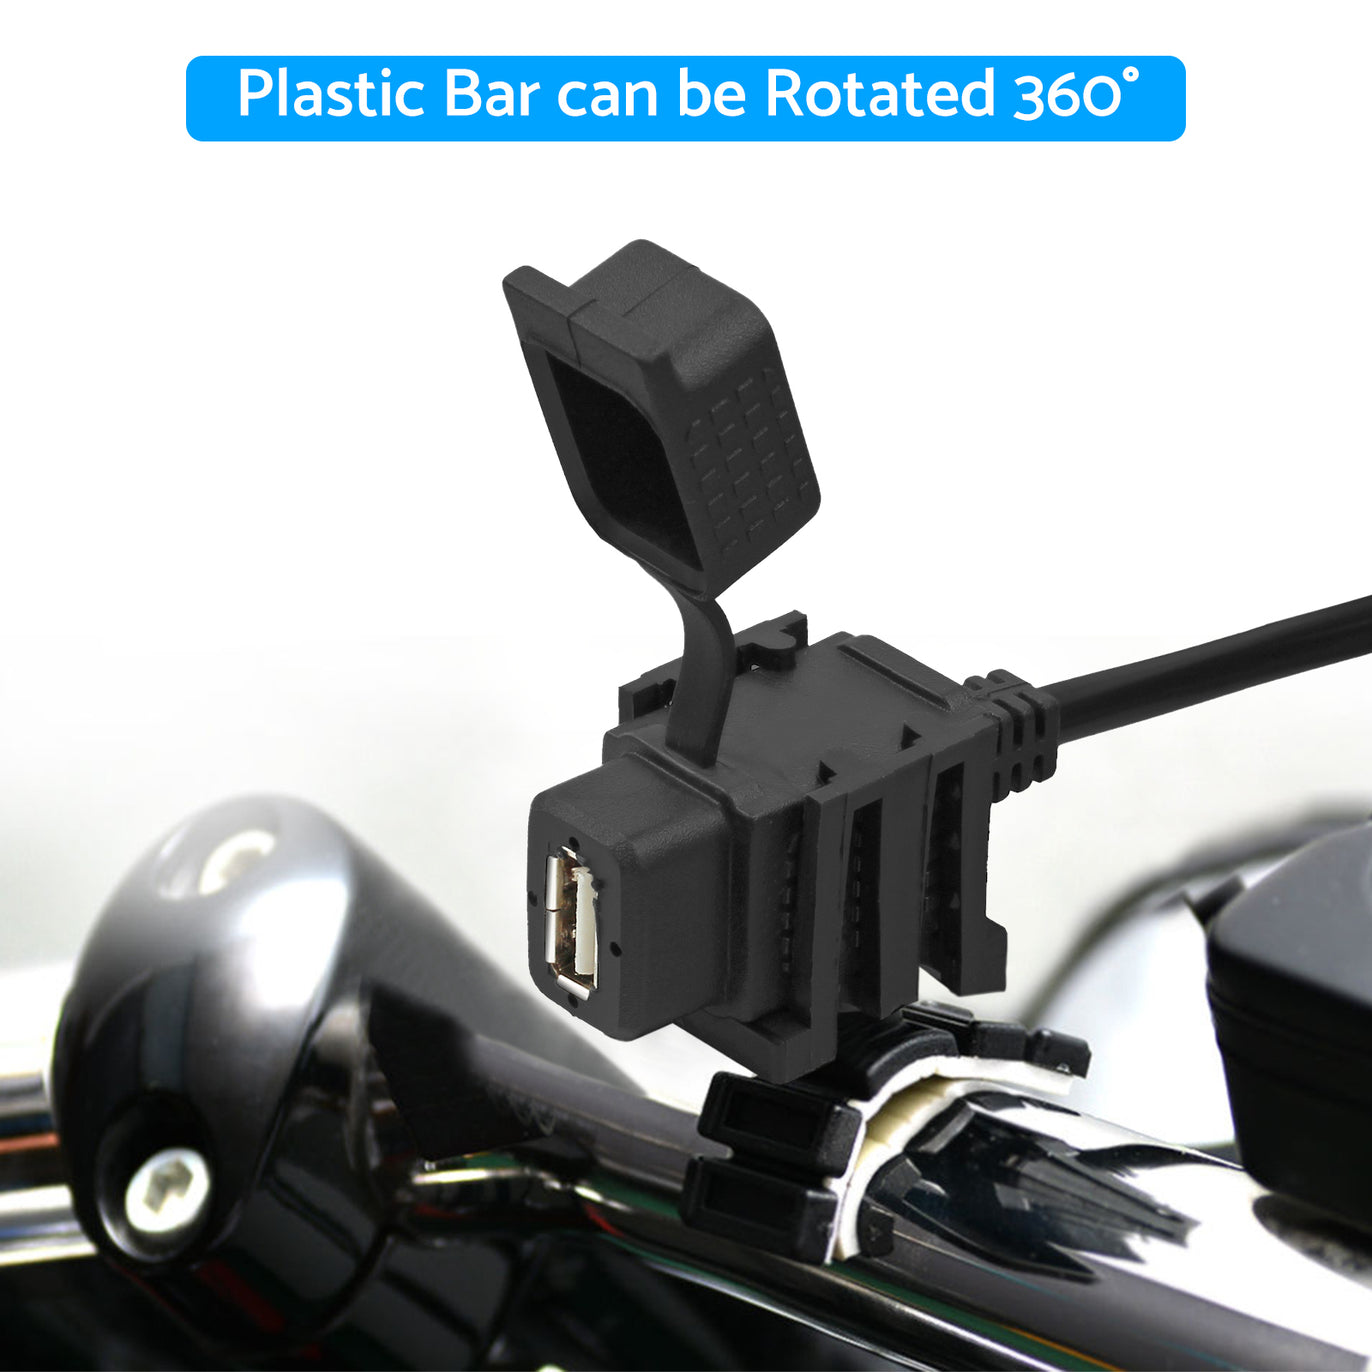 eSynic Professional Waterproof USB Motorcycle Charger